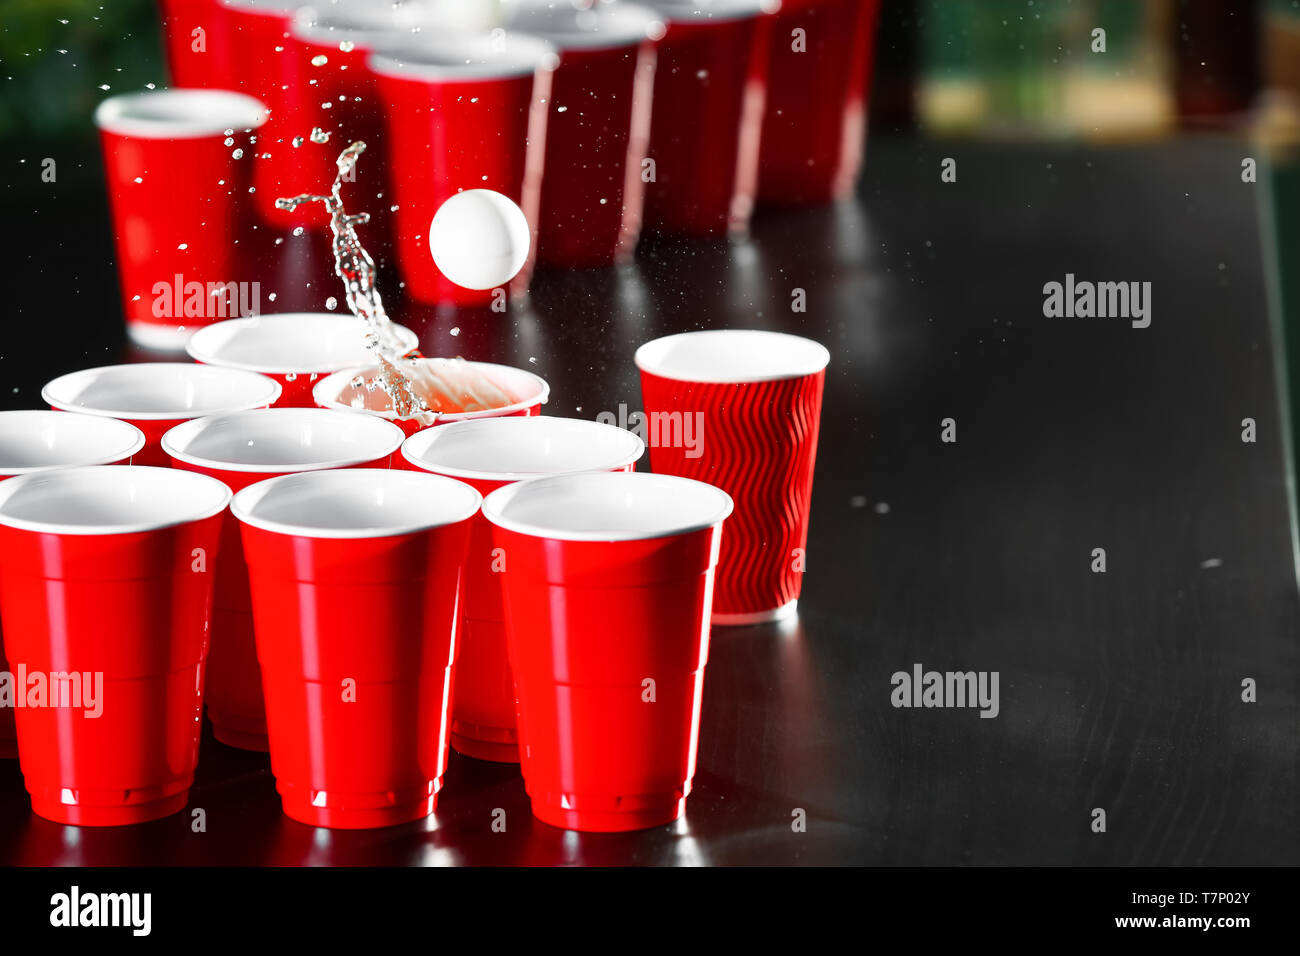 https://c8.alamy.com/comp/T7P02Y/cups-and-plastic-ball-for-beer-pong-game-on-table-T7P02Y.jpg